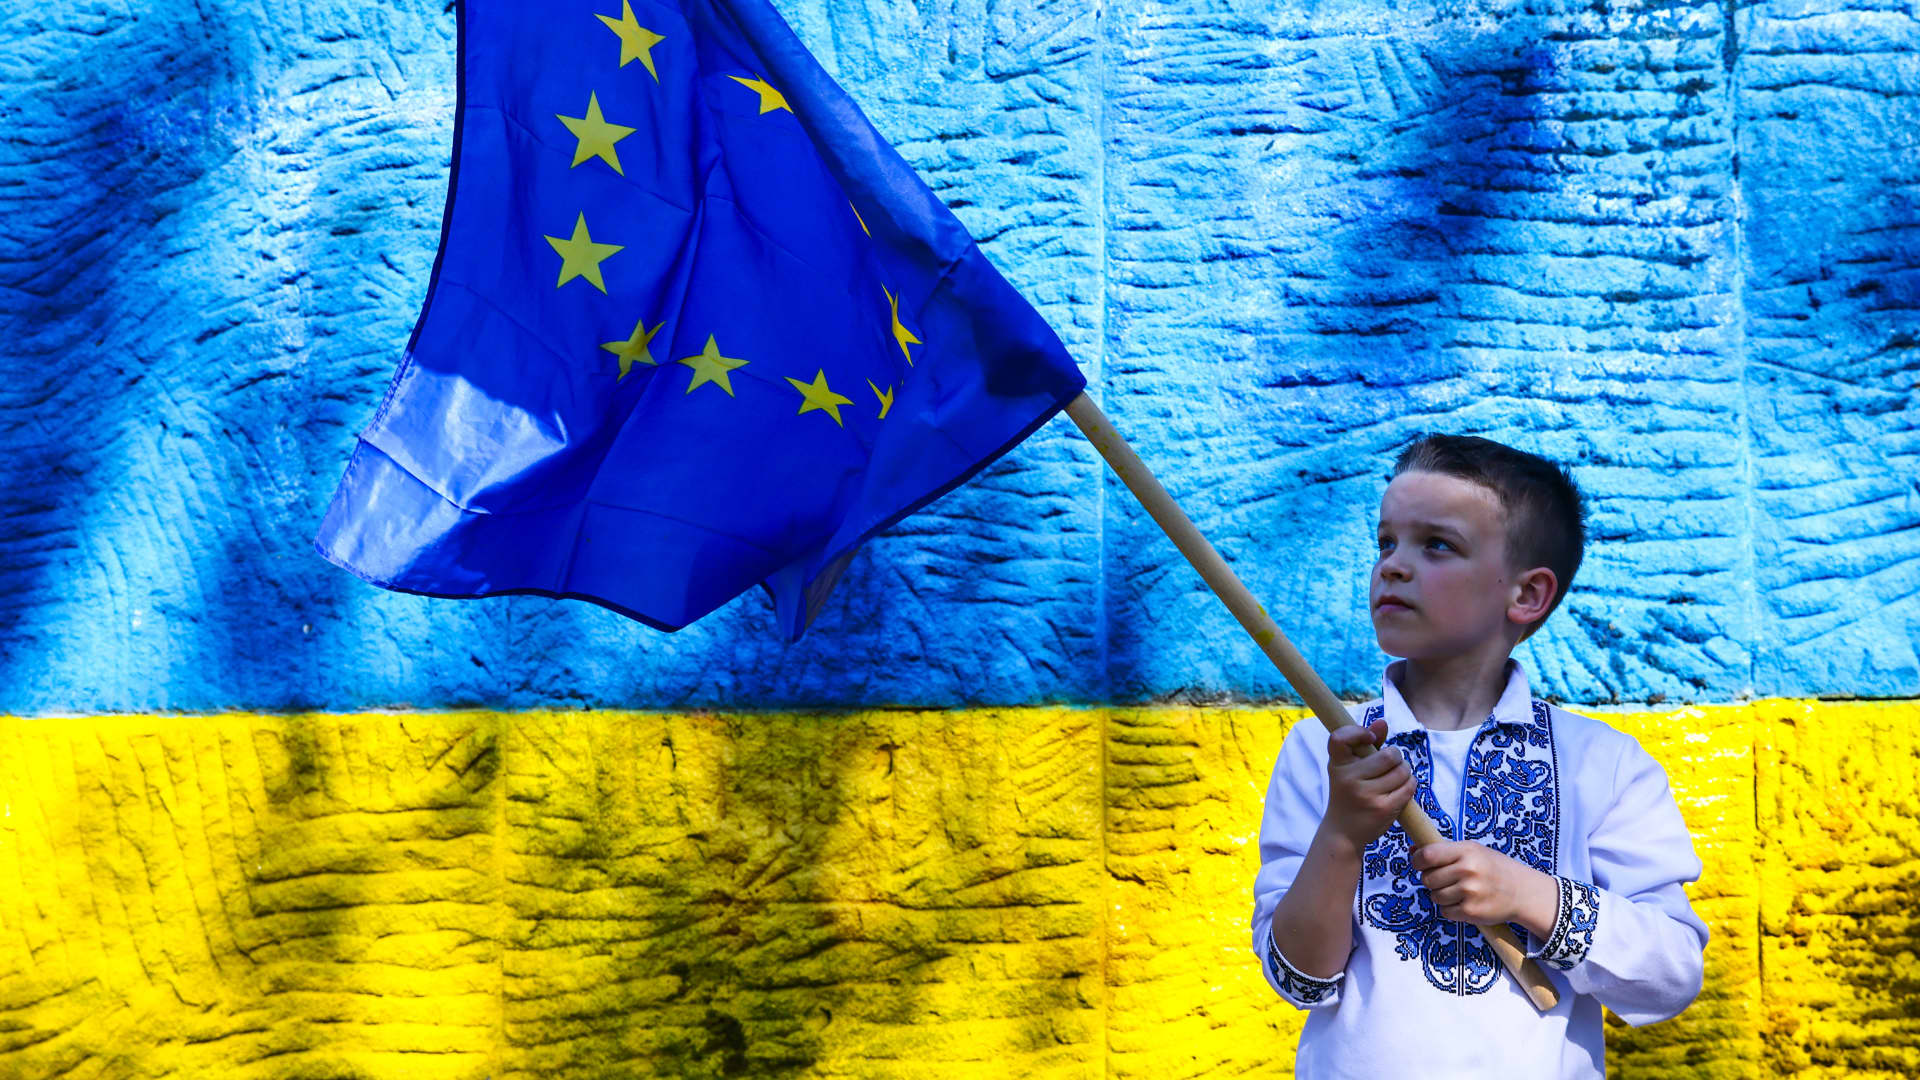 Ukraine has made no secret of its wish to join the EU and has already applied to join the bloc.